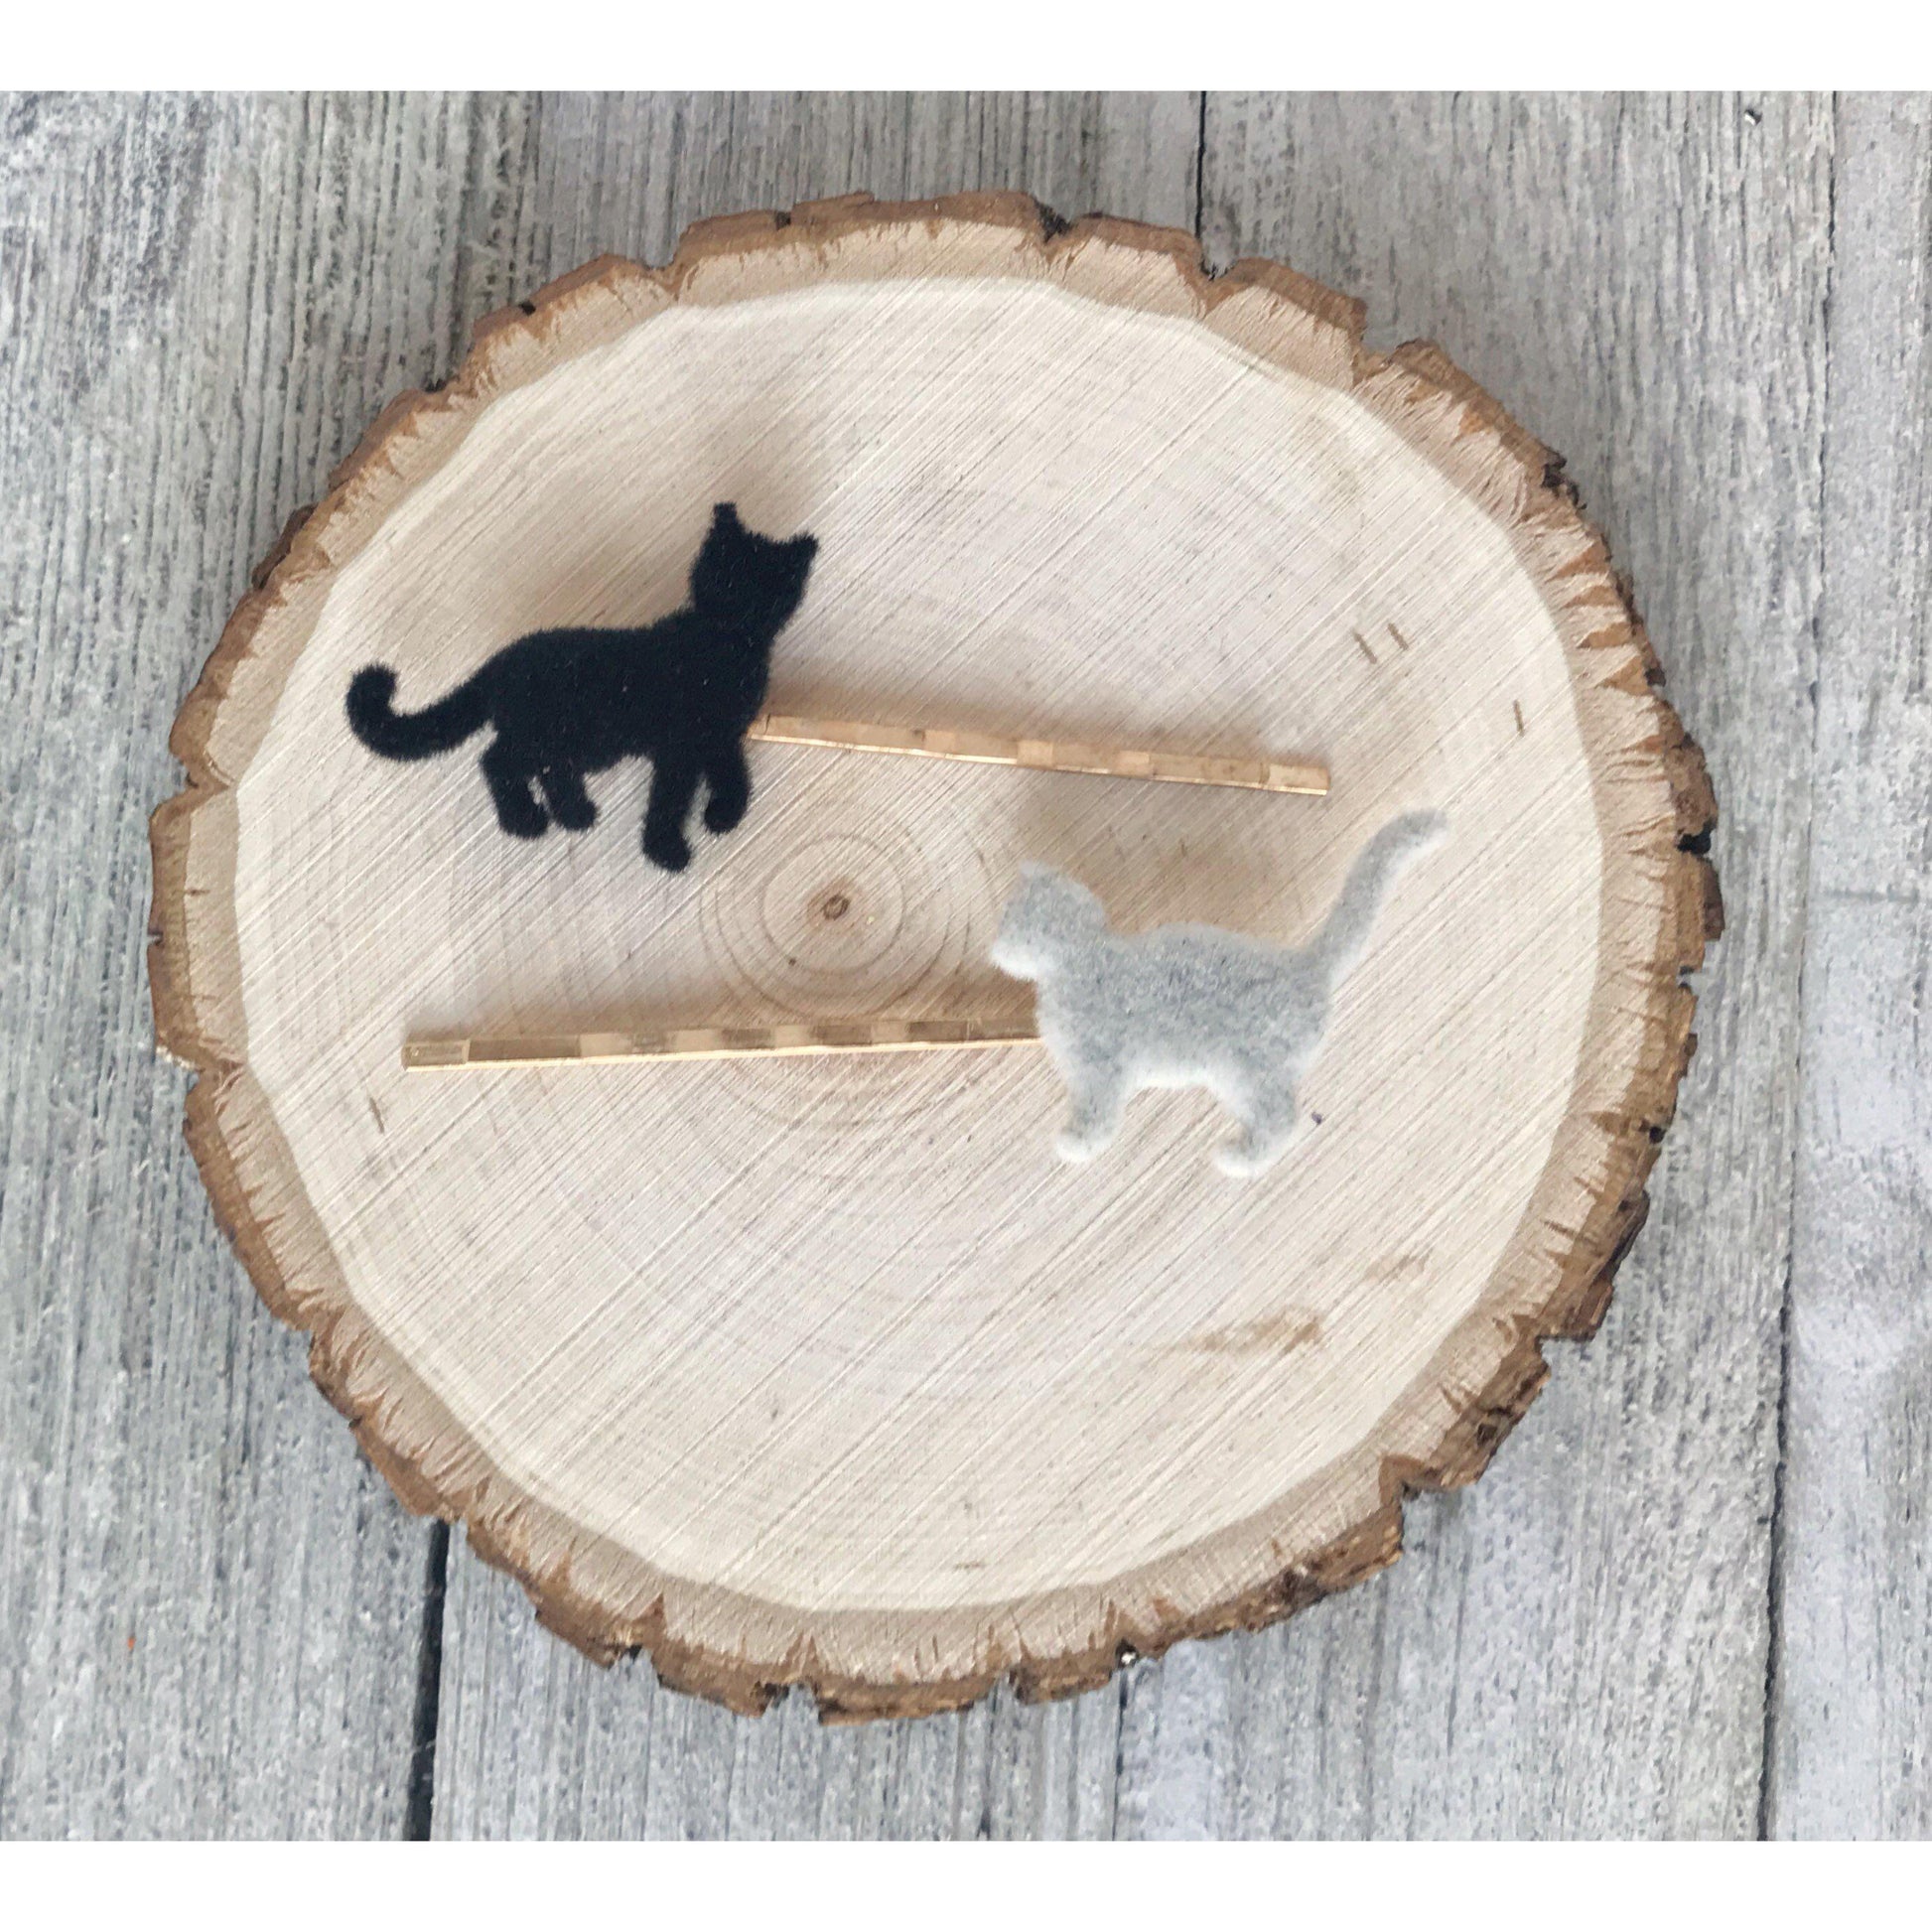 Black & Gray Felted Cat Hair Pins - Quirky Accessories for Feline-Inspired Hairstyles